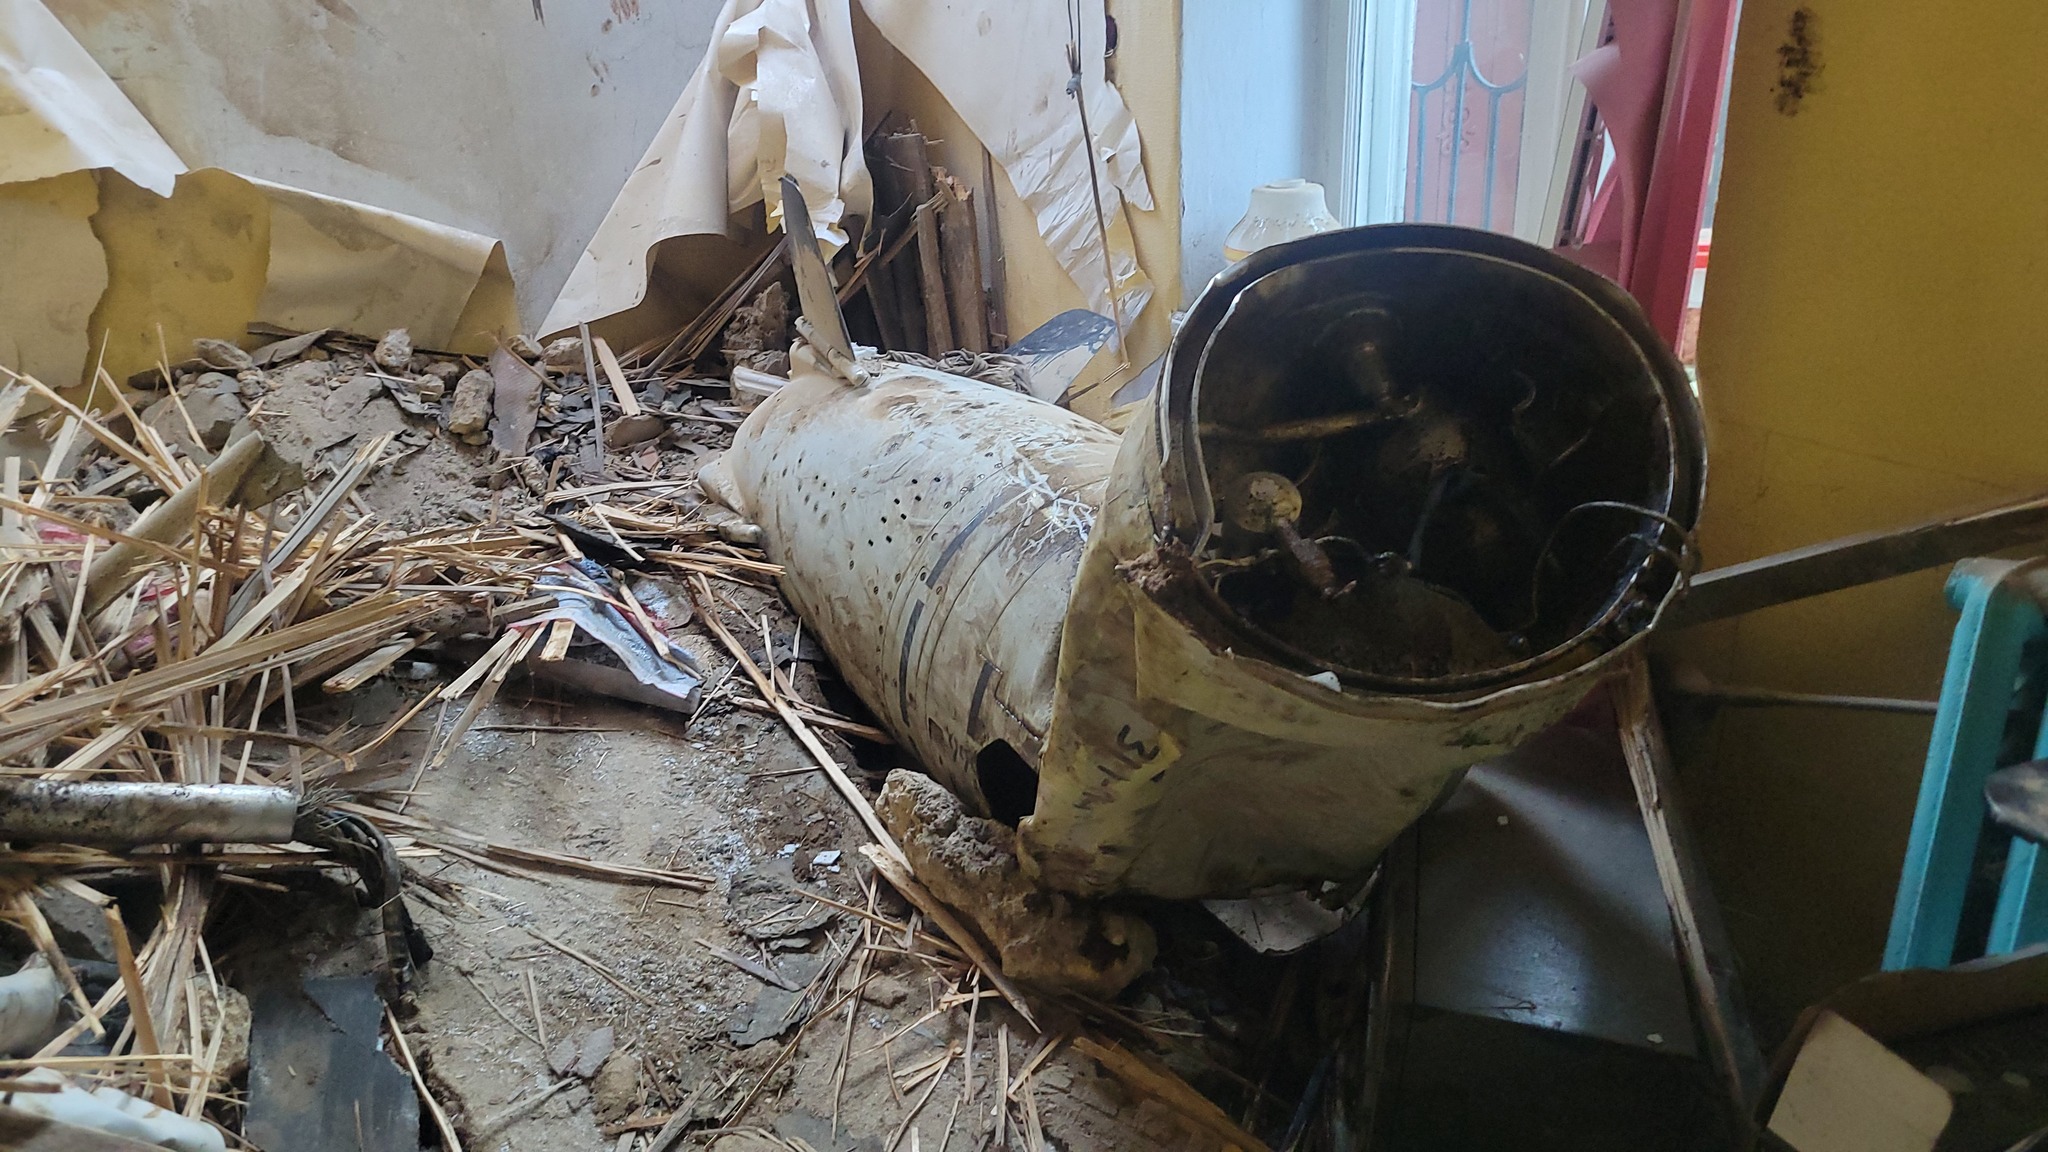 A part of a Russian Kalibr cruise missile inside a Ukrainian building in Odessa. (Photo from Operational Command South)